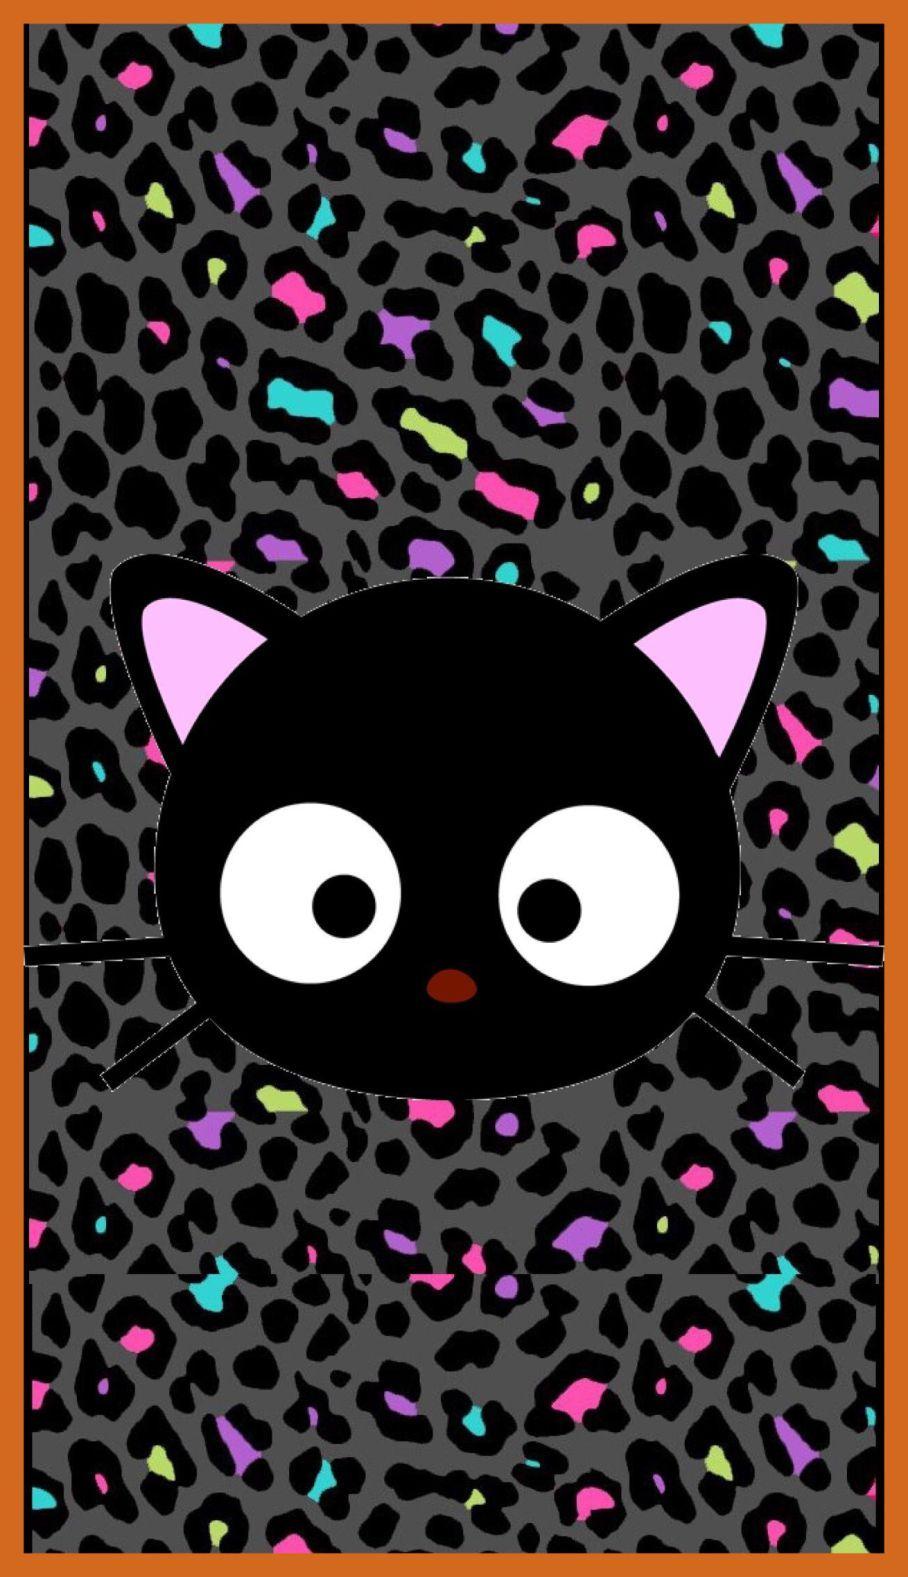 The Best Chococat Wallpaper By Artist Unknown Gatos Of Cute Cat